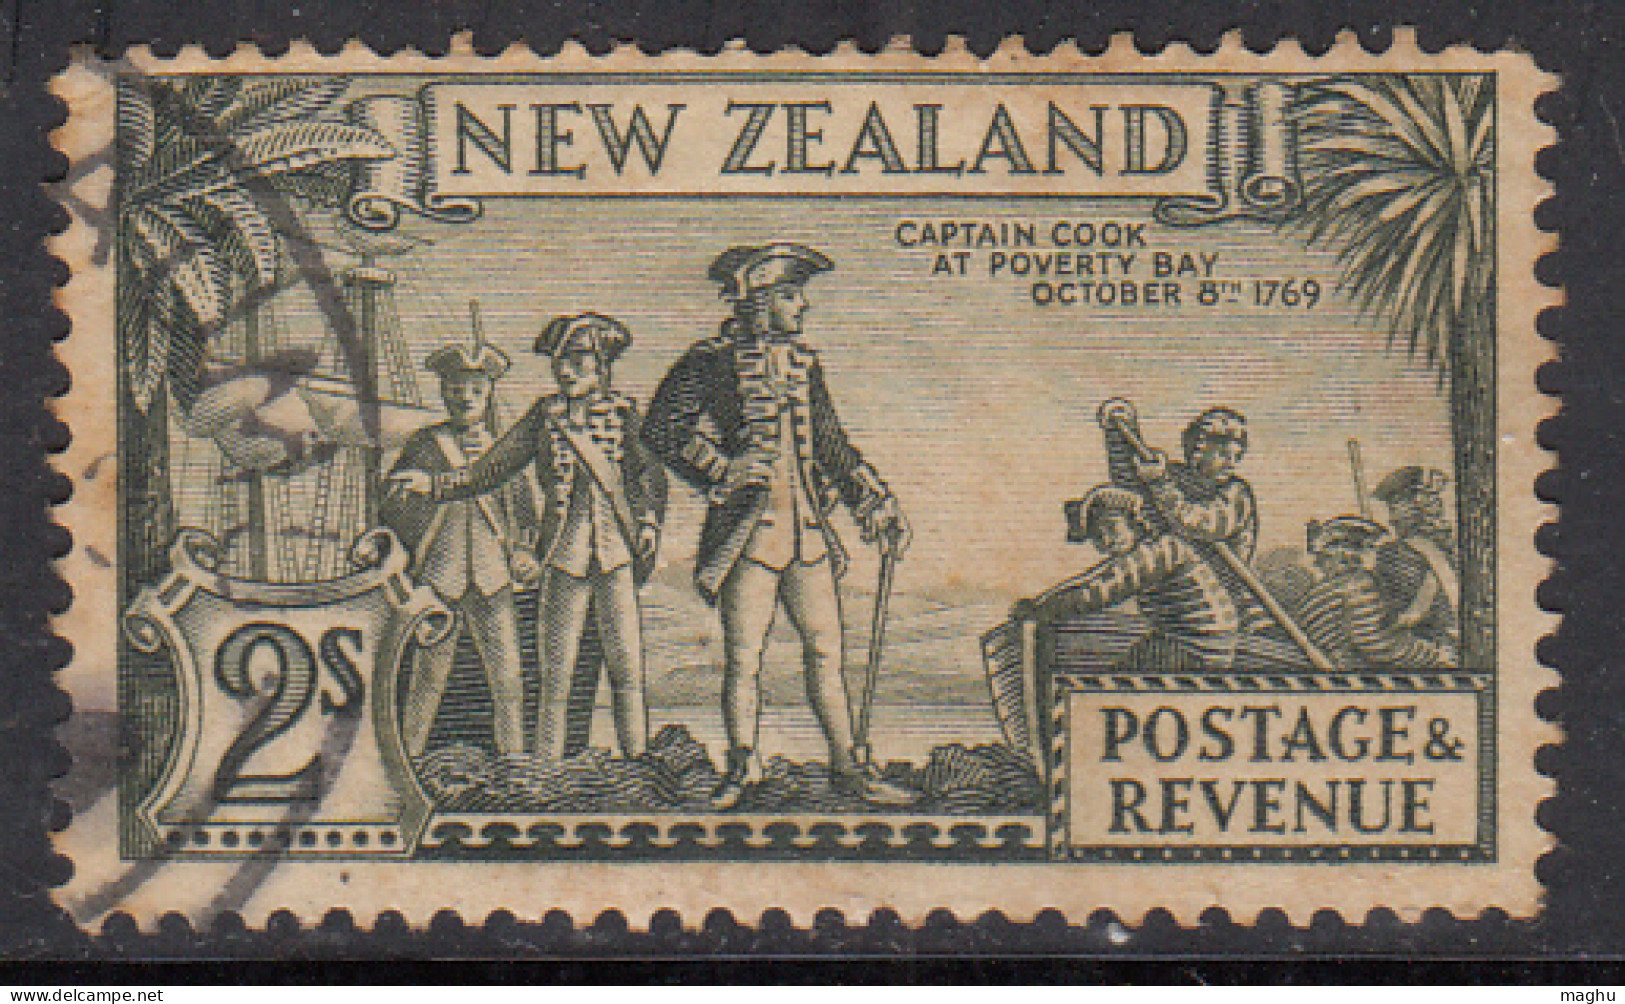 2s Used Captain Cook, New Zealand SG589, (Perf.,13½ X 13½) 1936 - Used Stamps